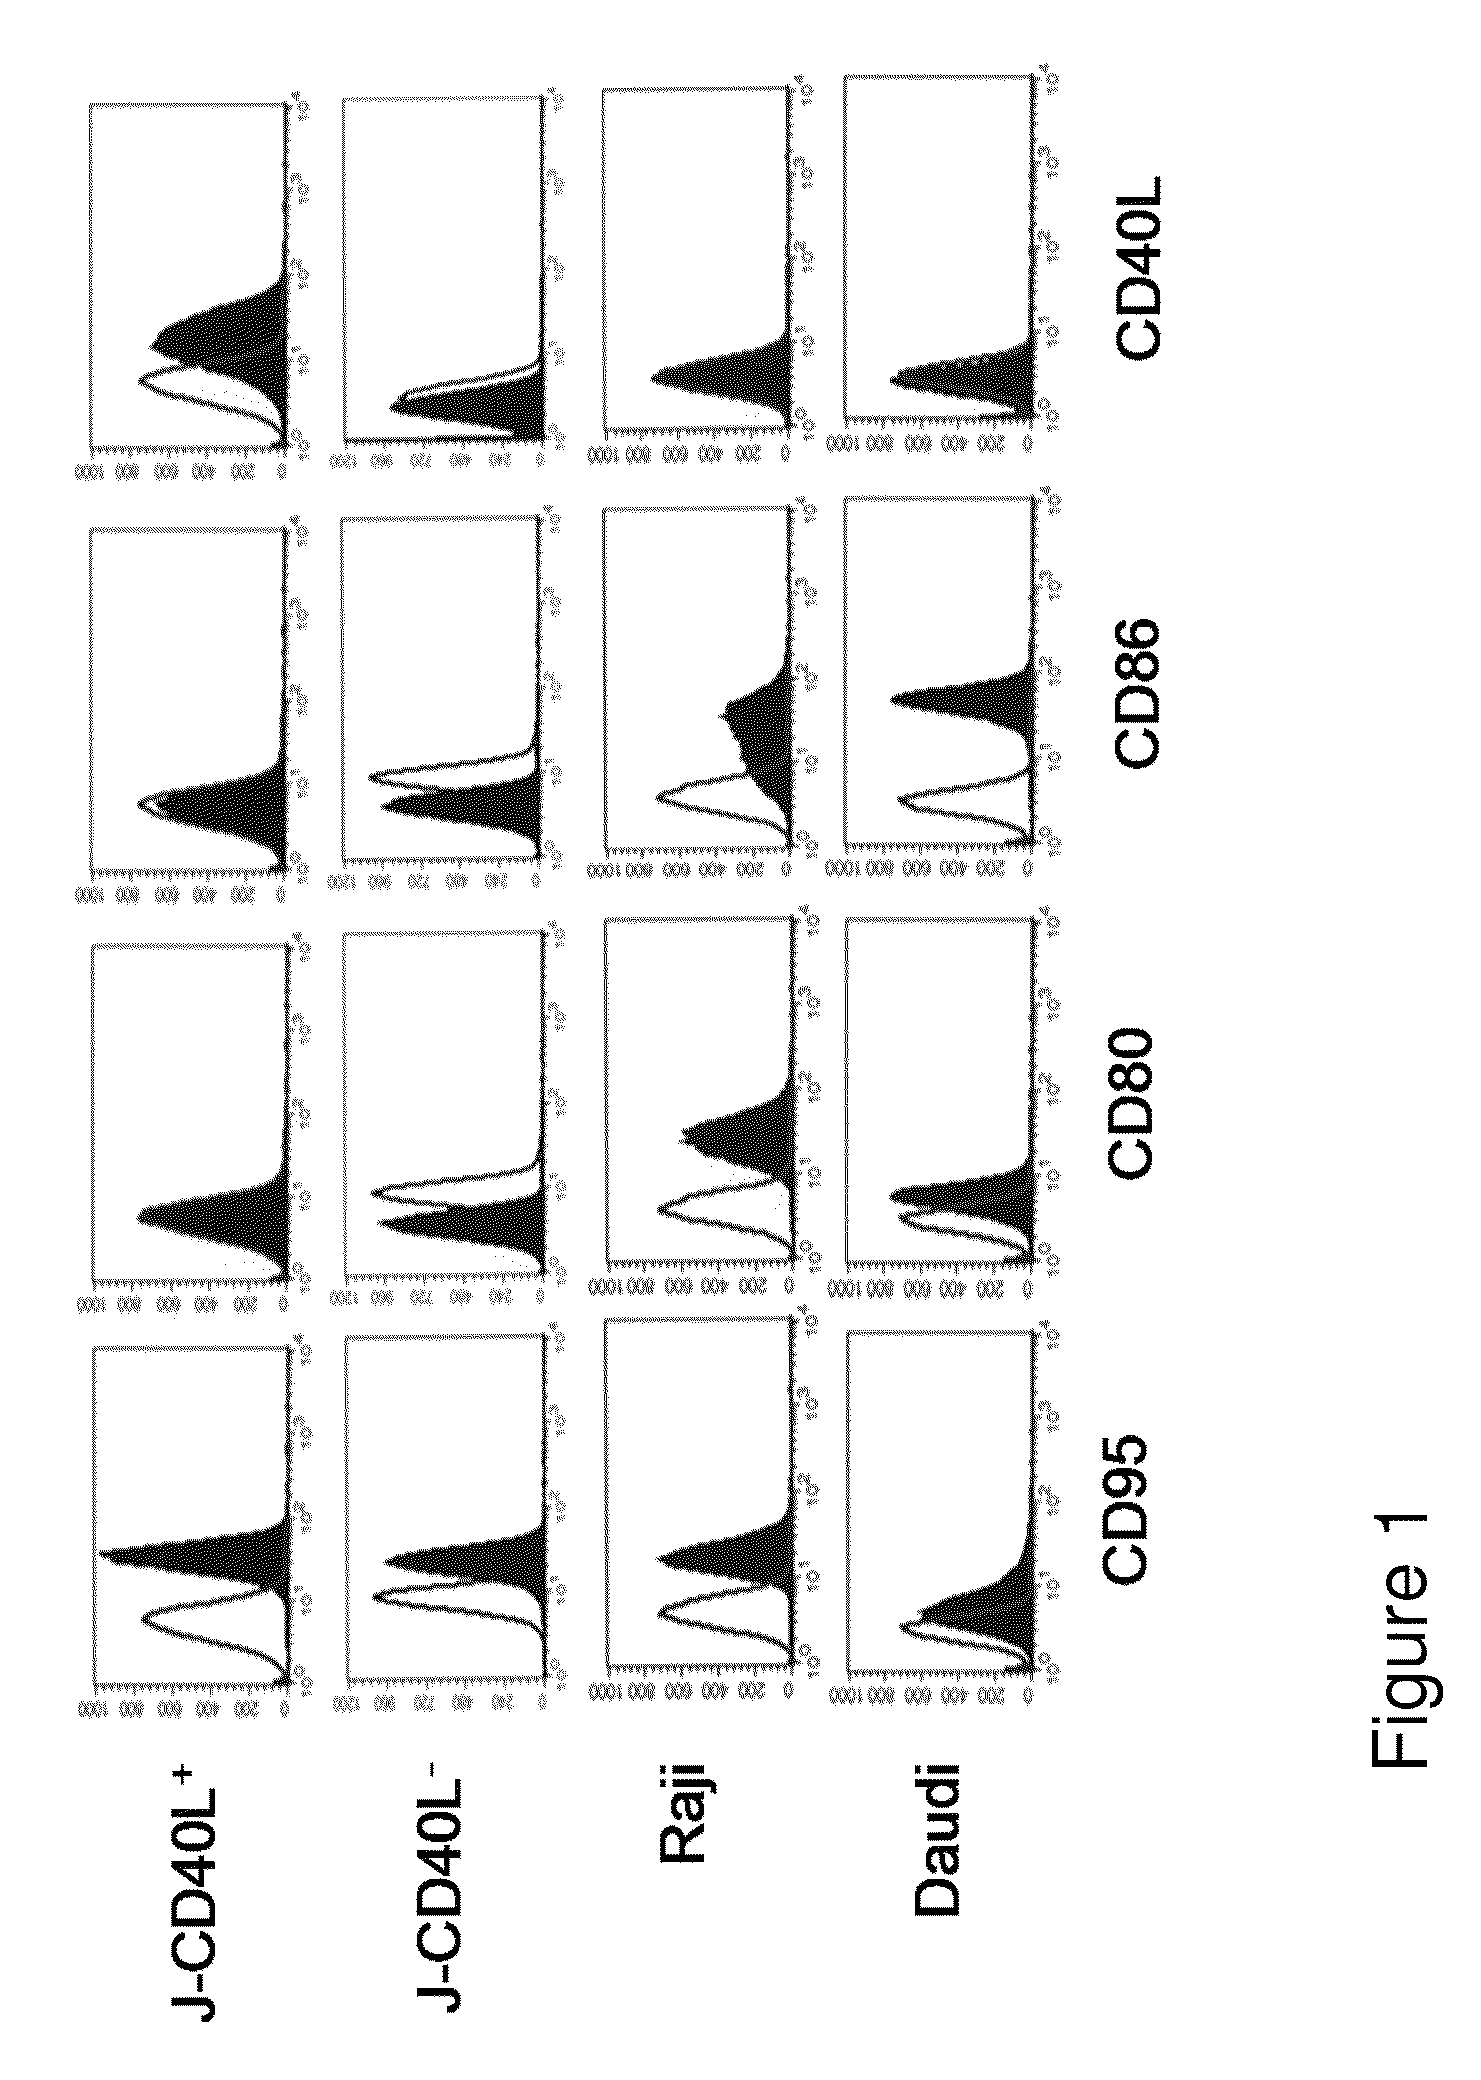 Compositions and methods for treatment of hematological malignancies